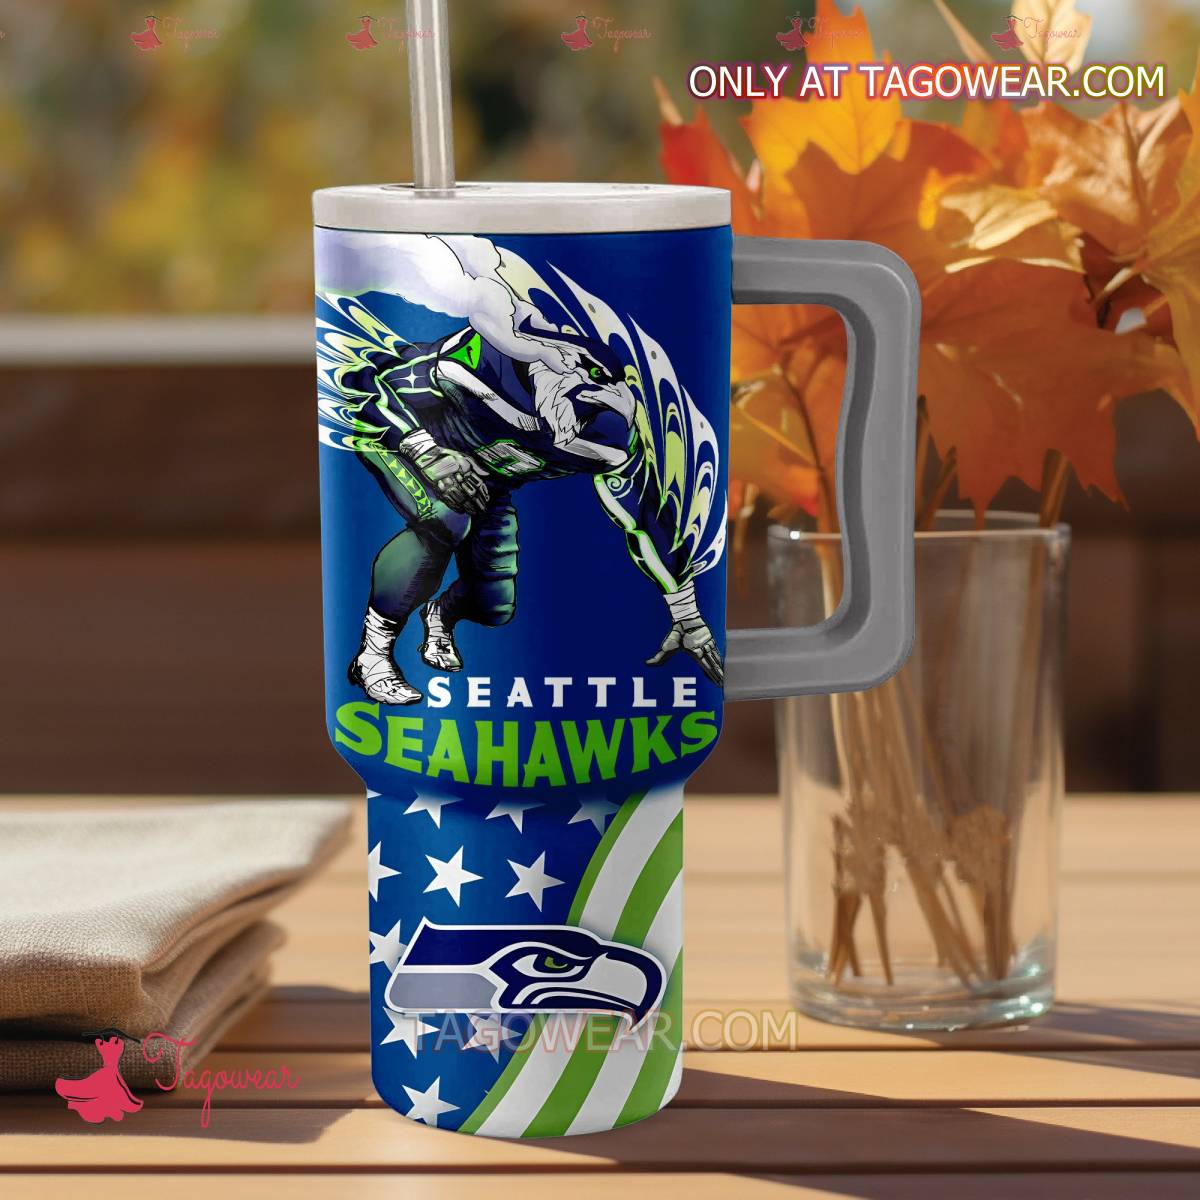 Seattle Seahawks Bring On The 12 40oz Tumbler With Handle a